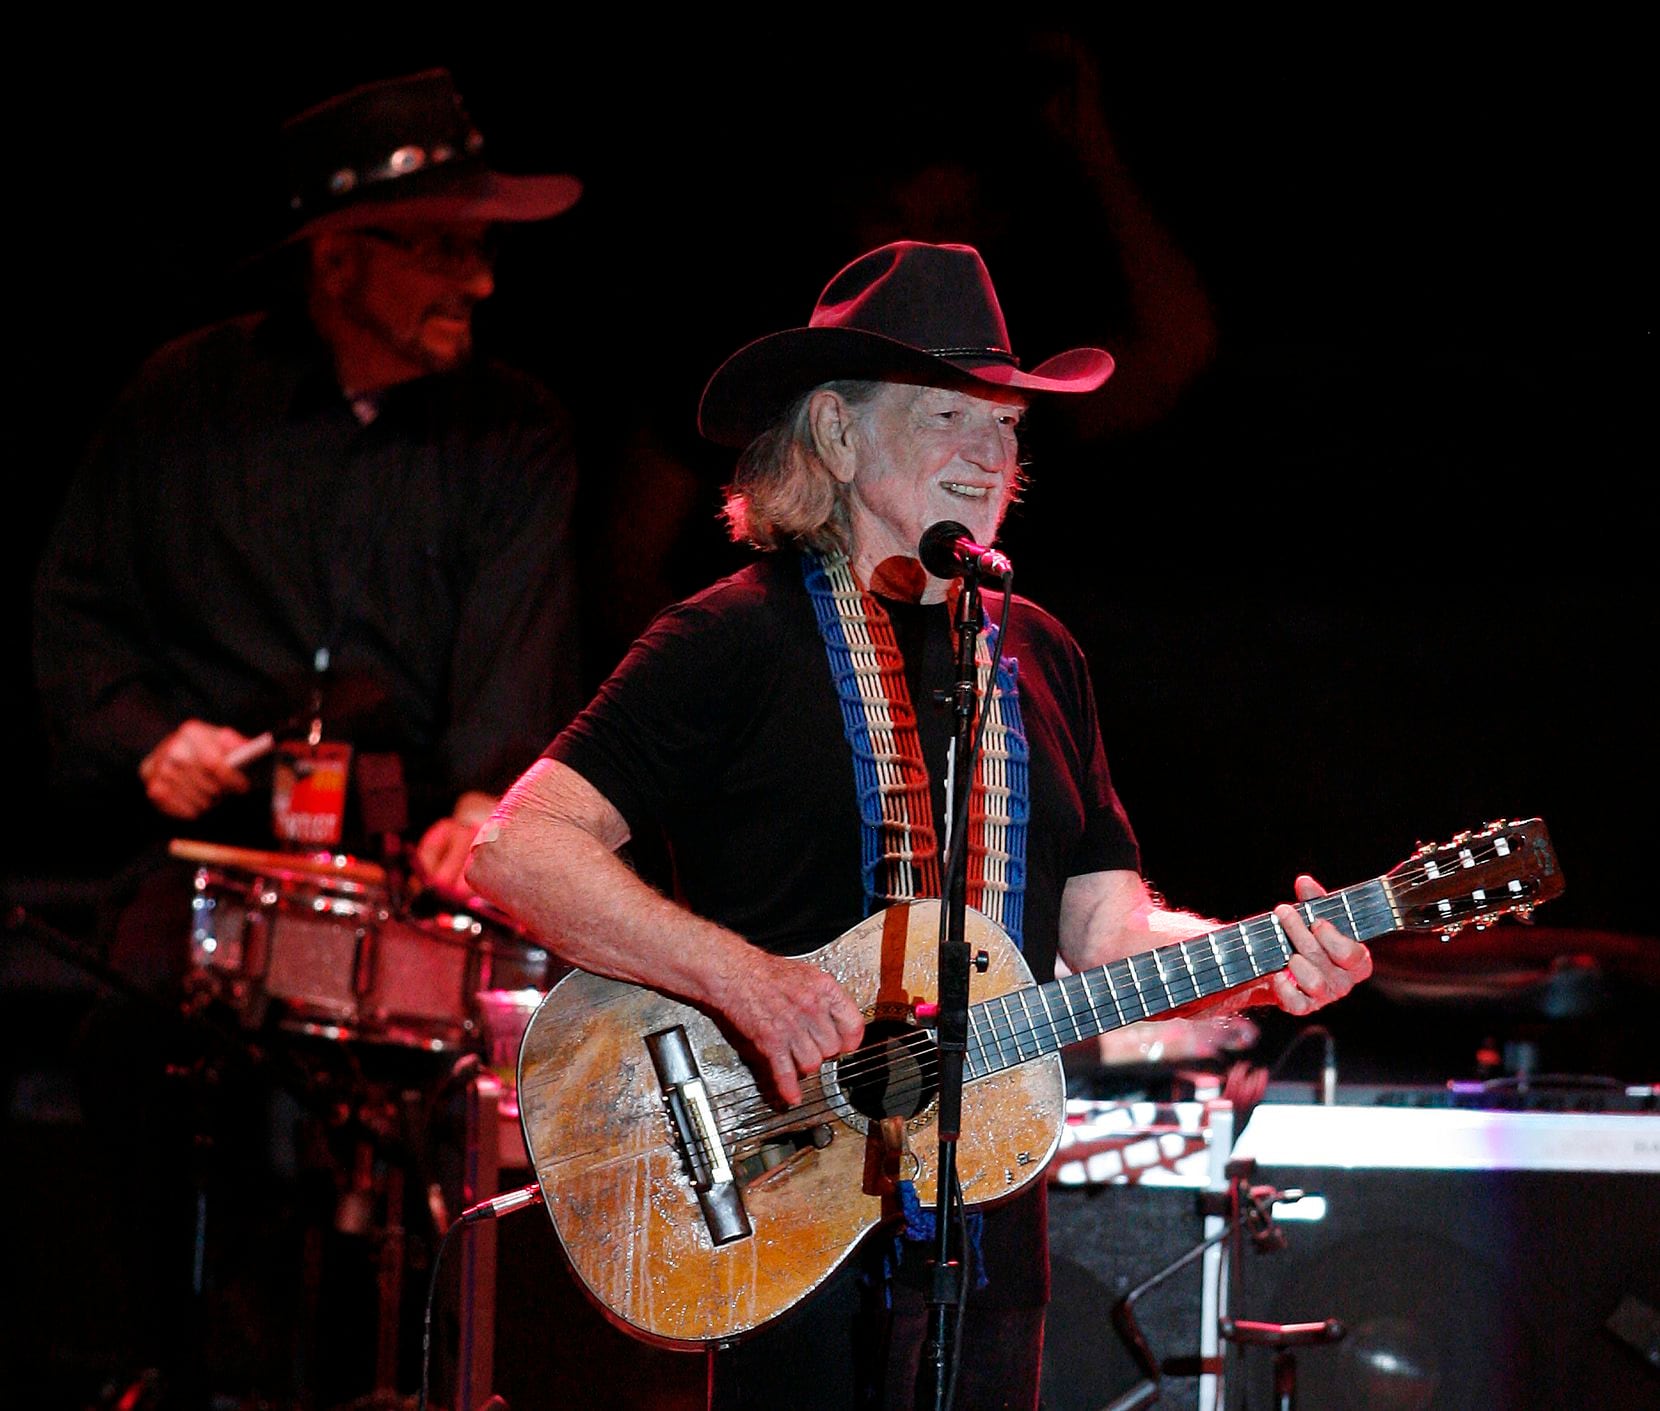 Willie Nelson plays "Me and Paul" while drummer Paul English plays in the background during...